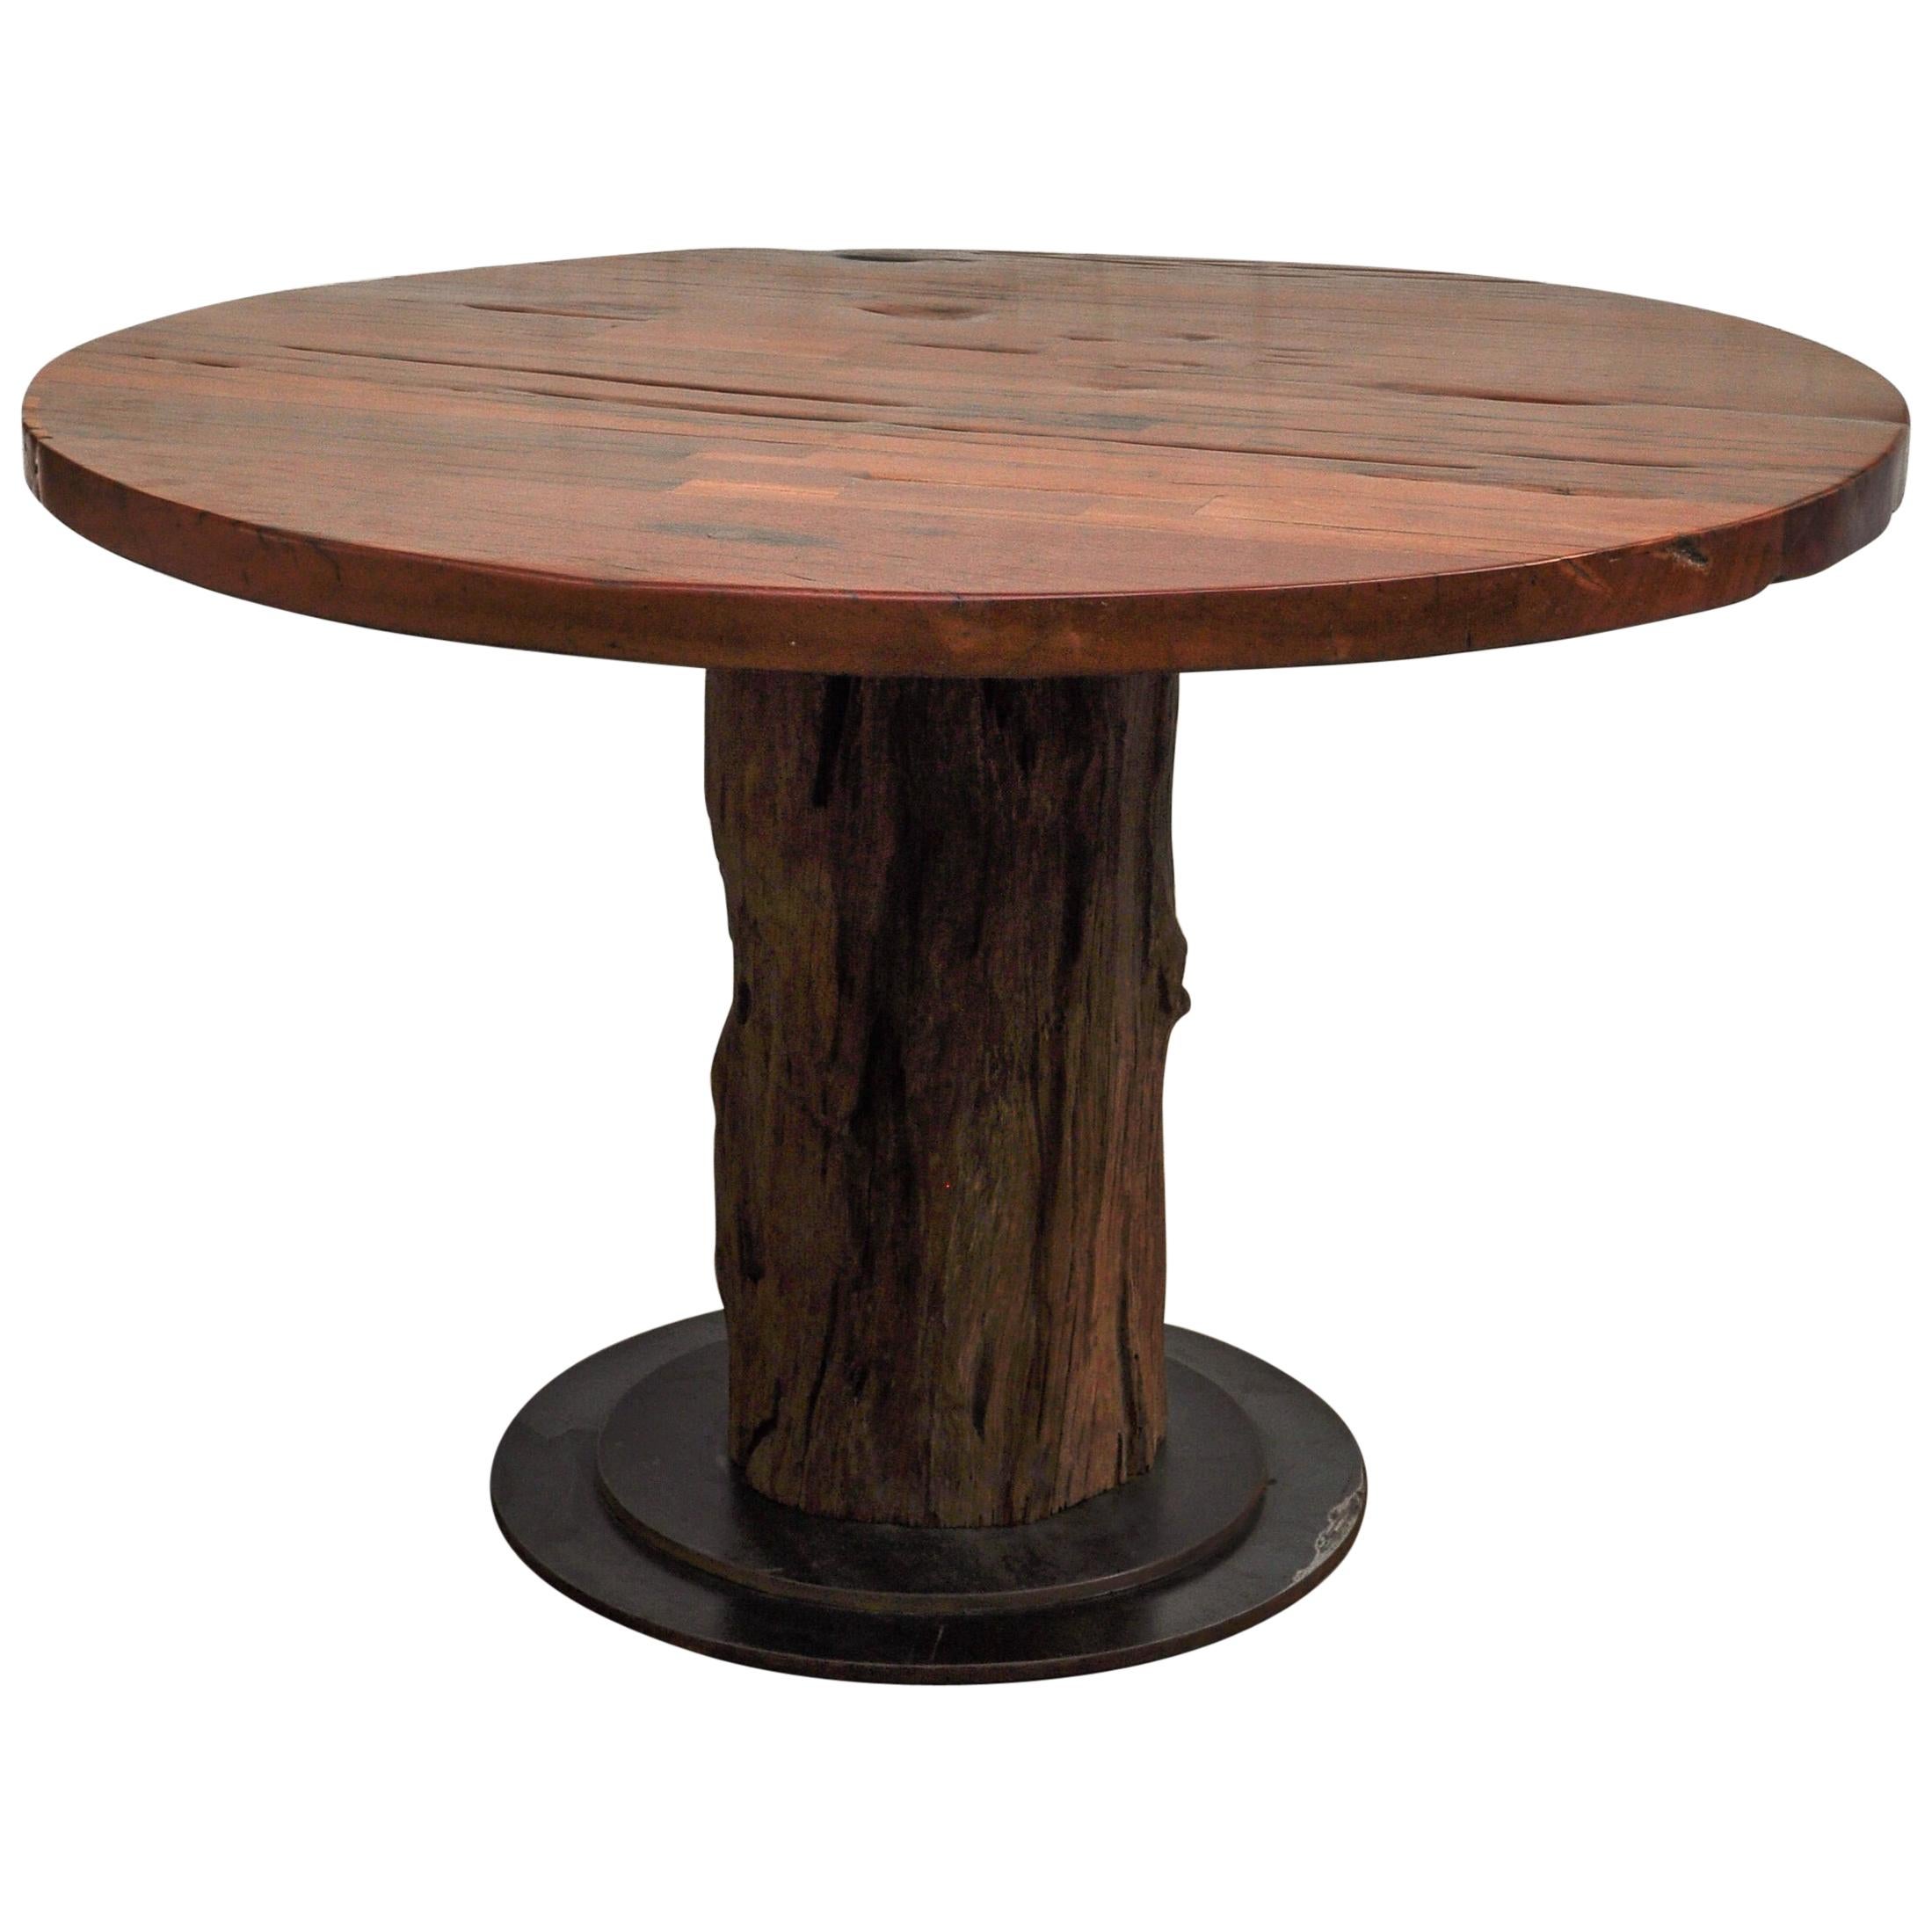 Rustic Round Table Recycled Bridge Wood with Tiered Steel Plate Base